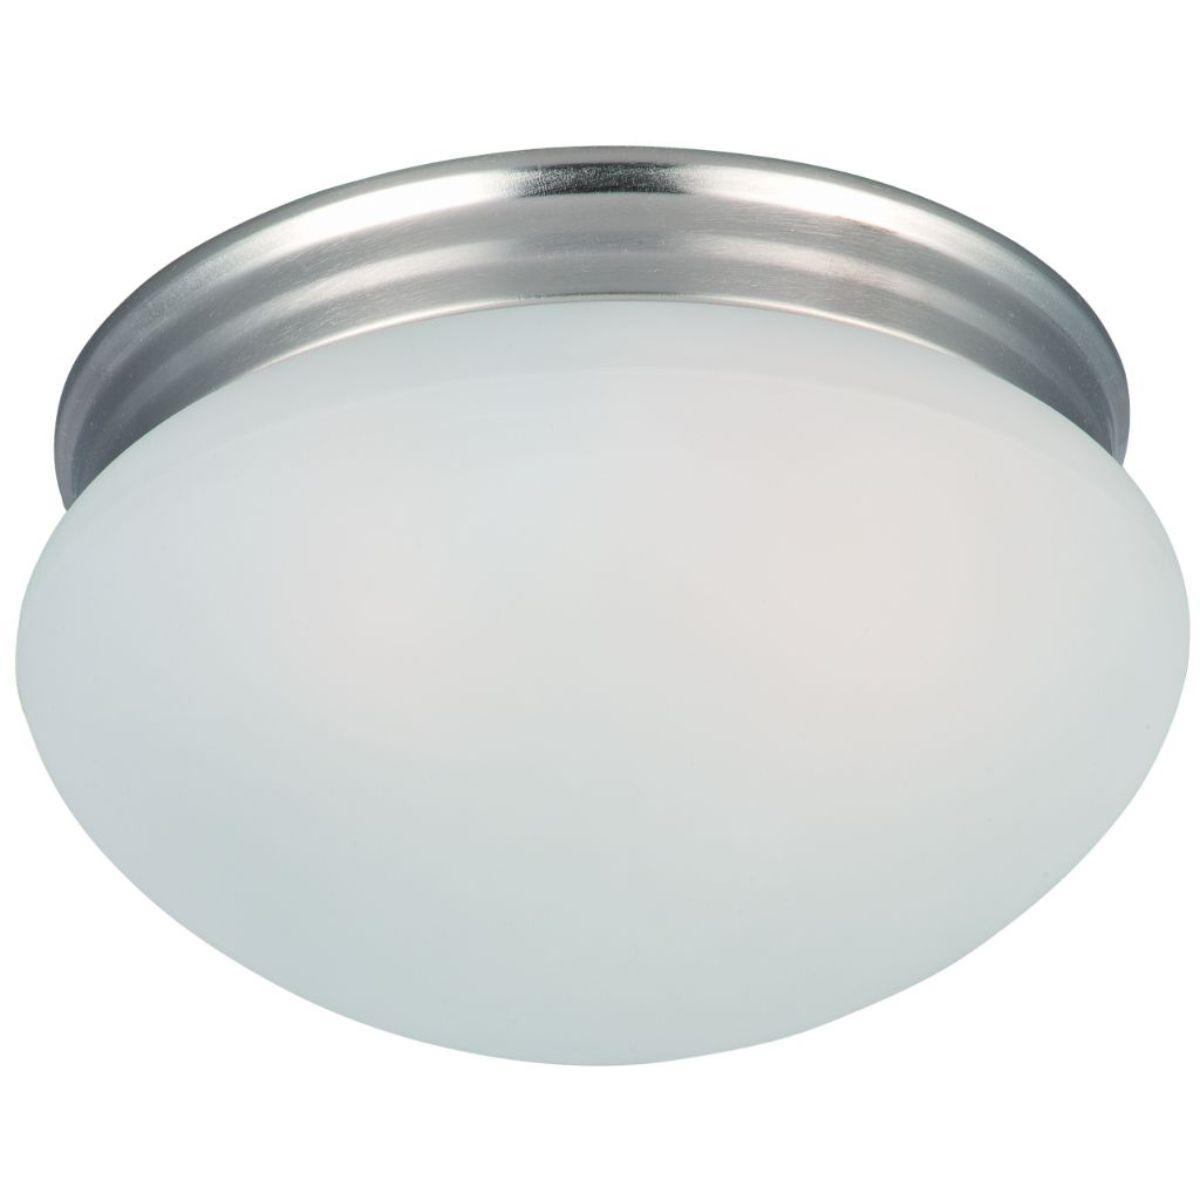 Essentials-588x 9 in. 2 Lights Ceiling Puff Light with frosted glass